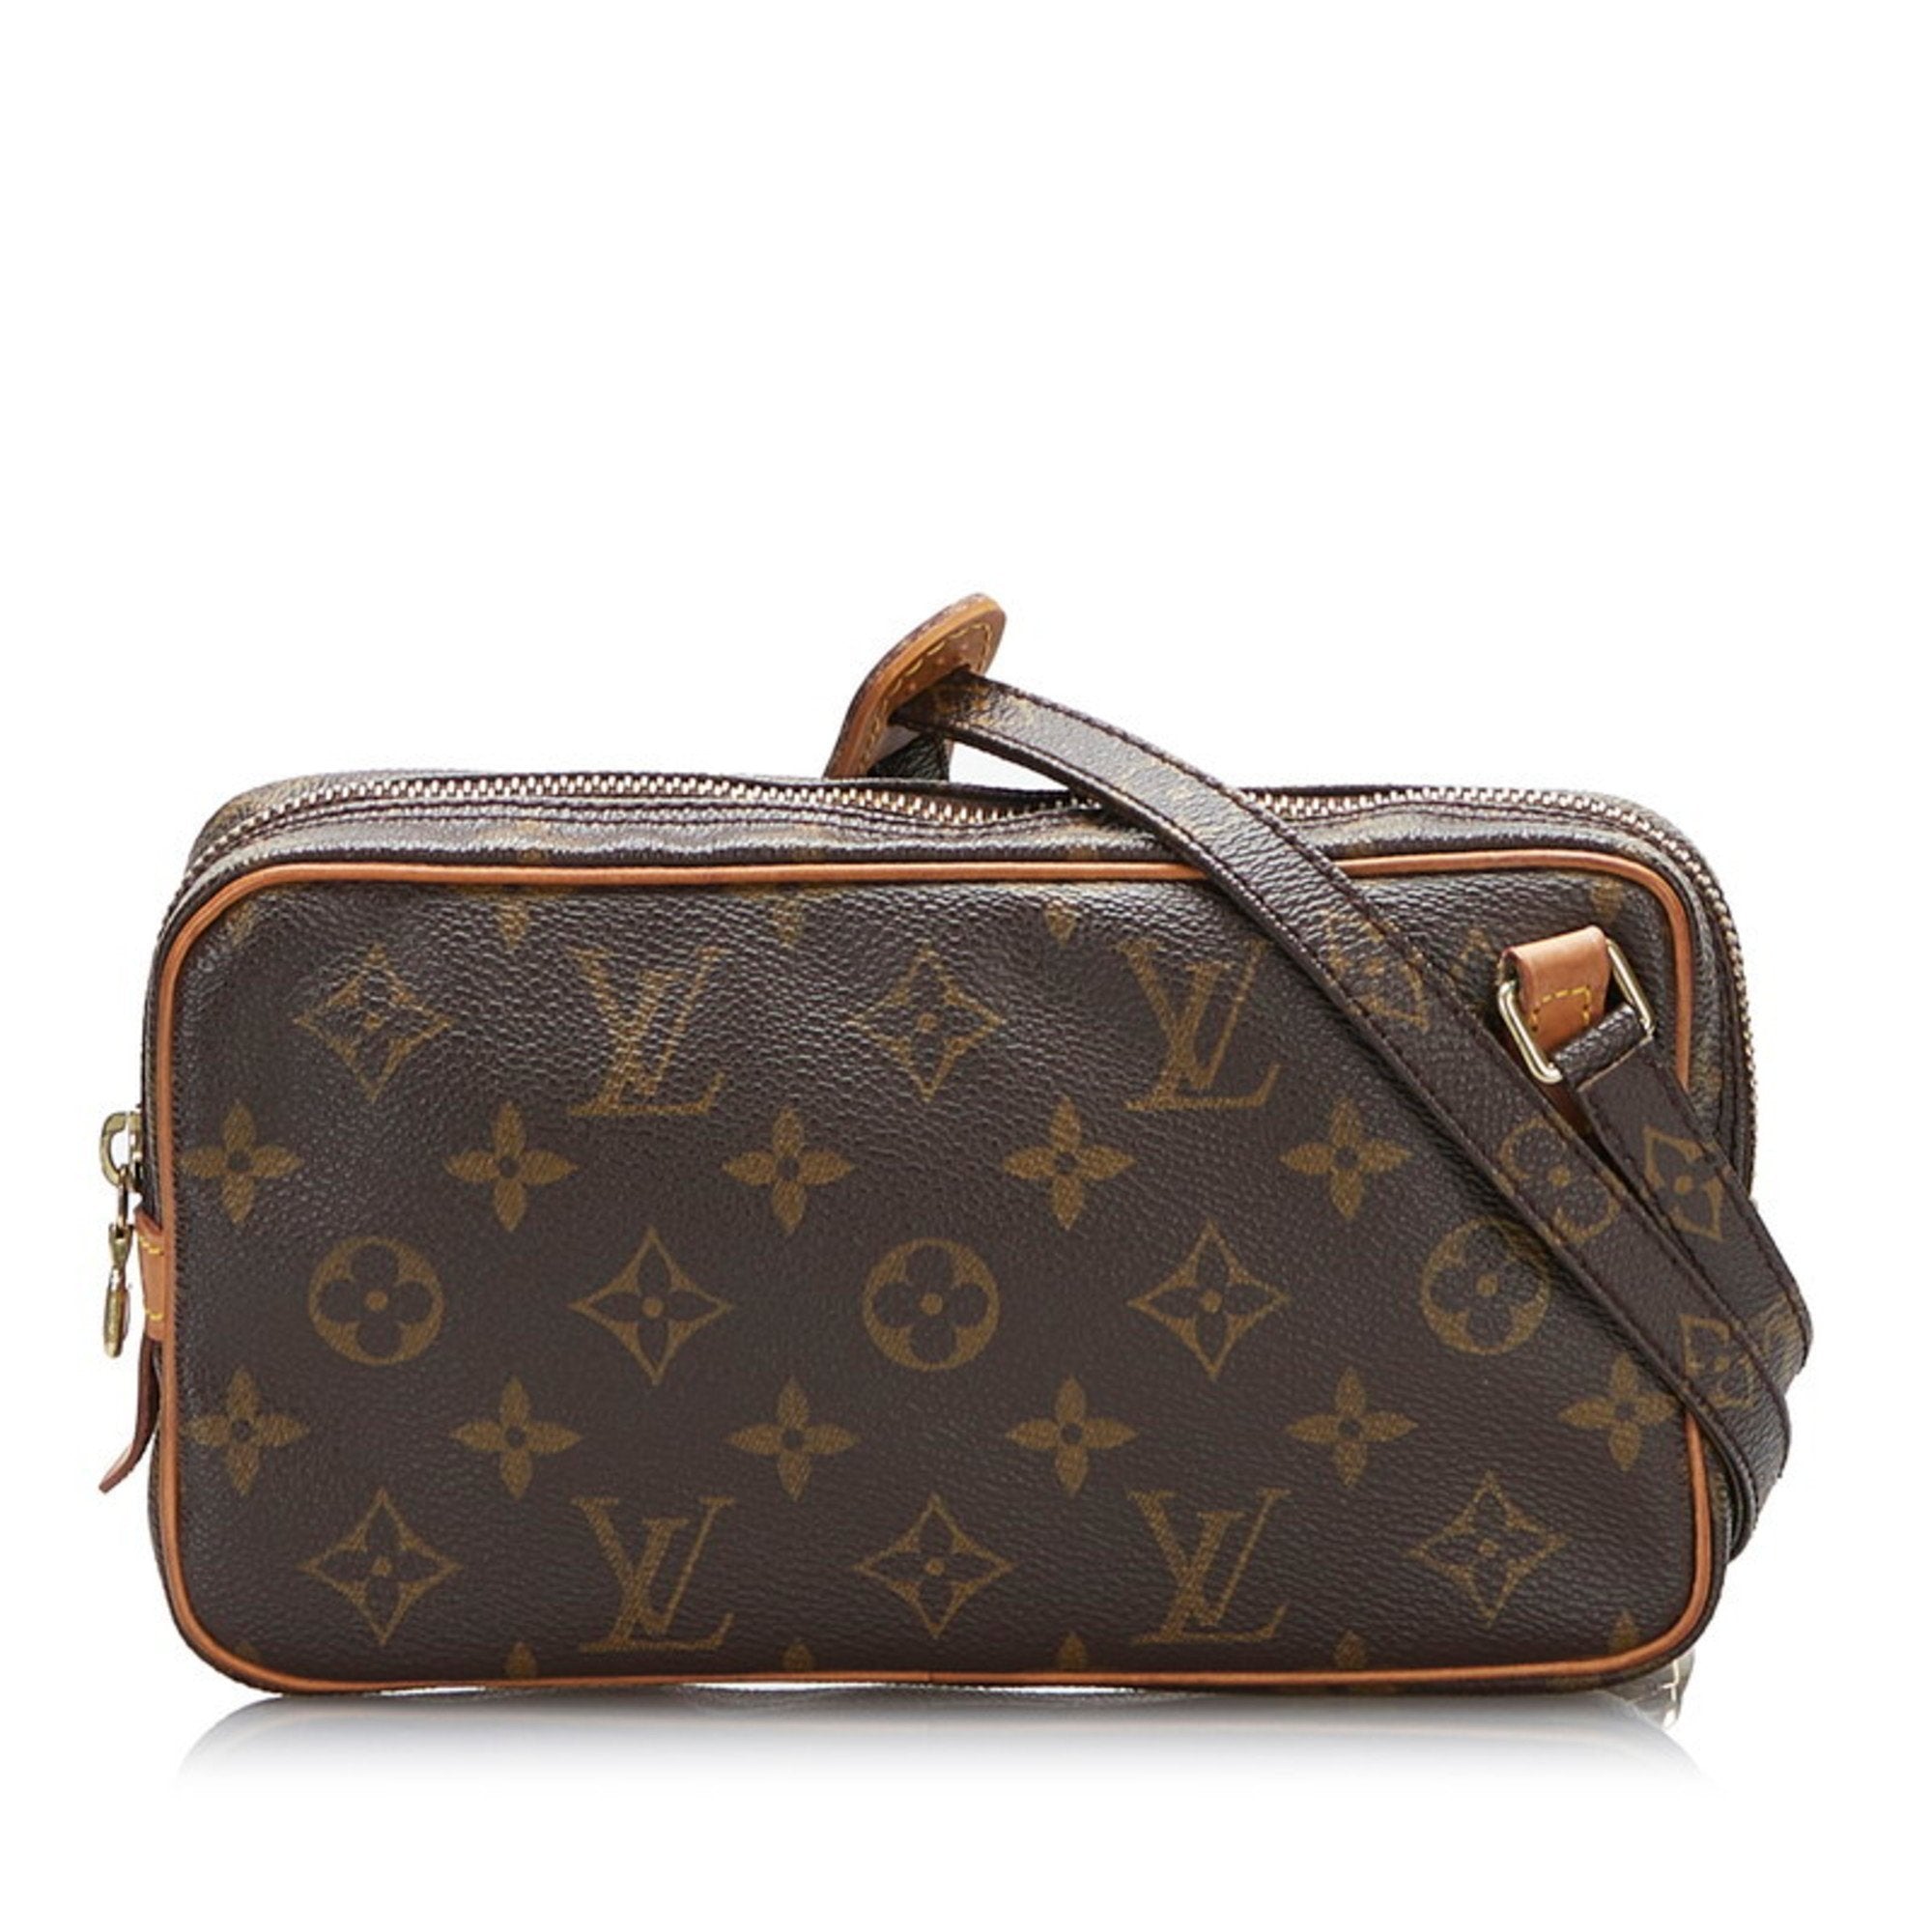 Louis Vuitton Marly bandouliere - Good or Bag